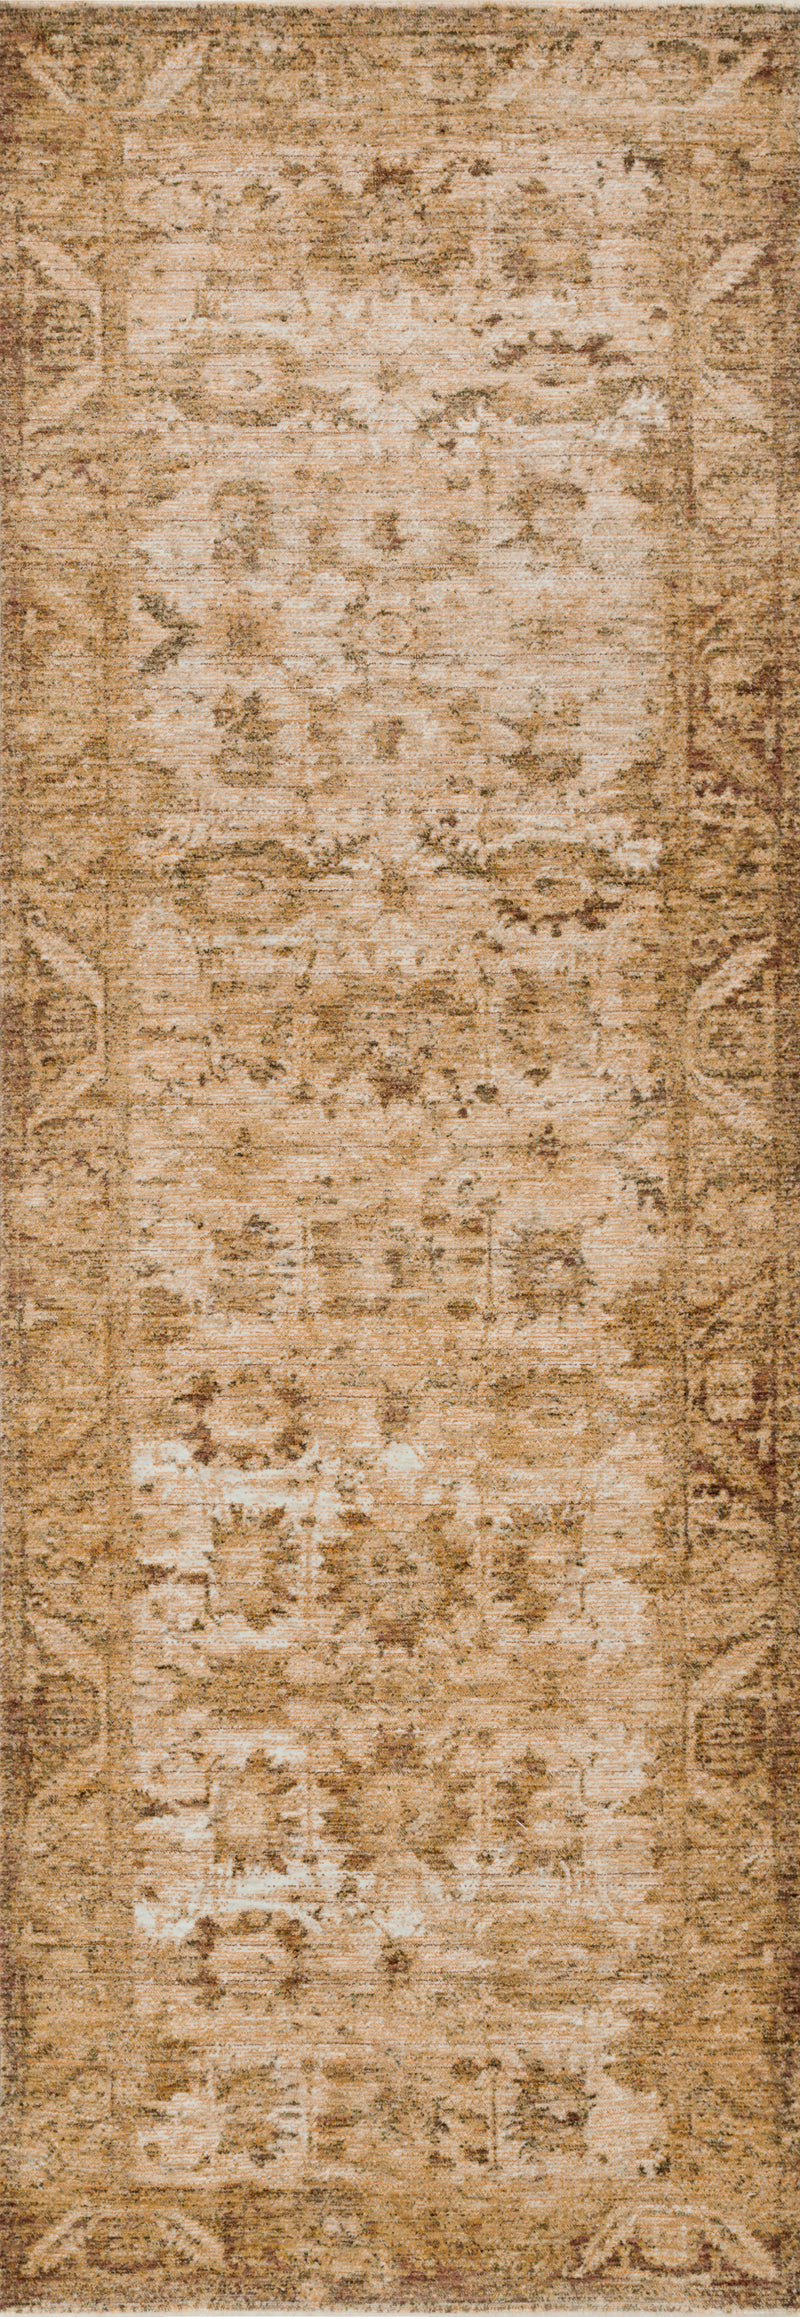 KENNEDY Collection Rug  in  SAND / COPPER Beige Accent Power-Loomed Polyester